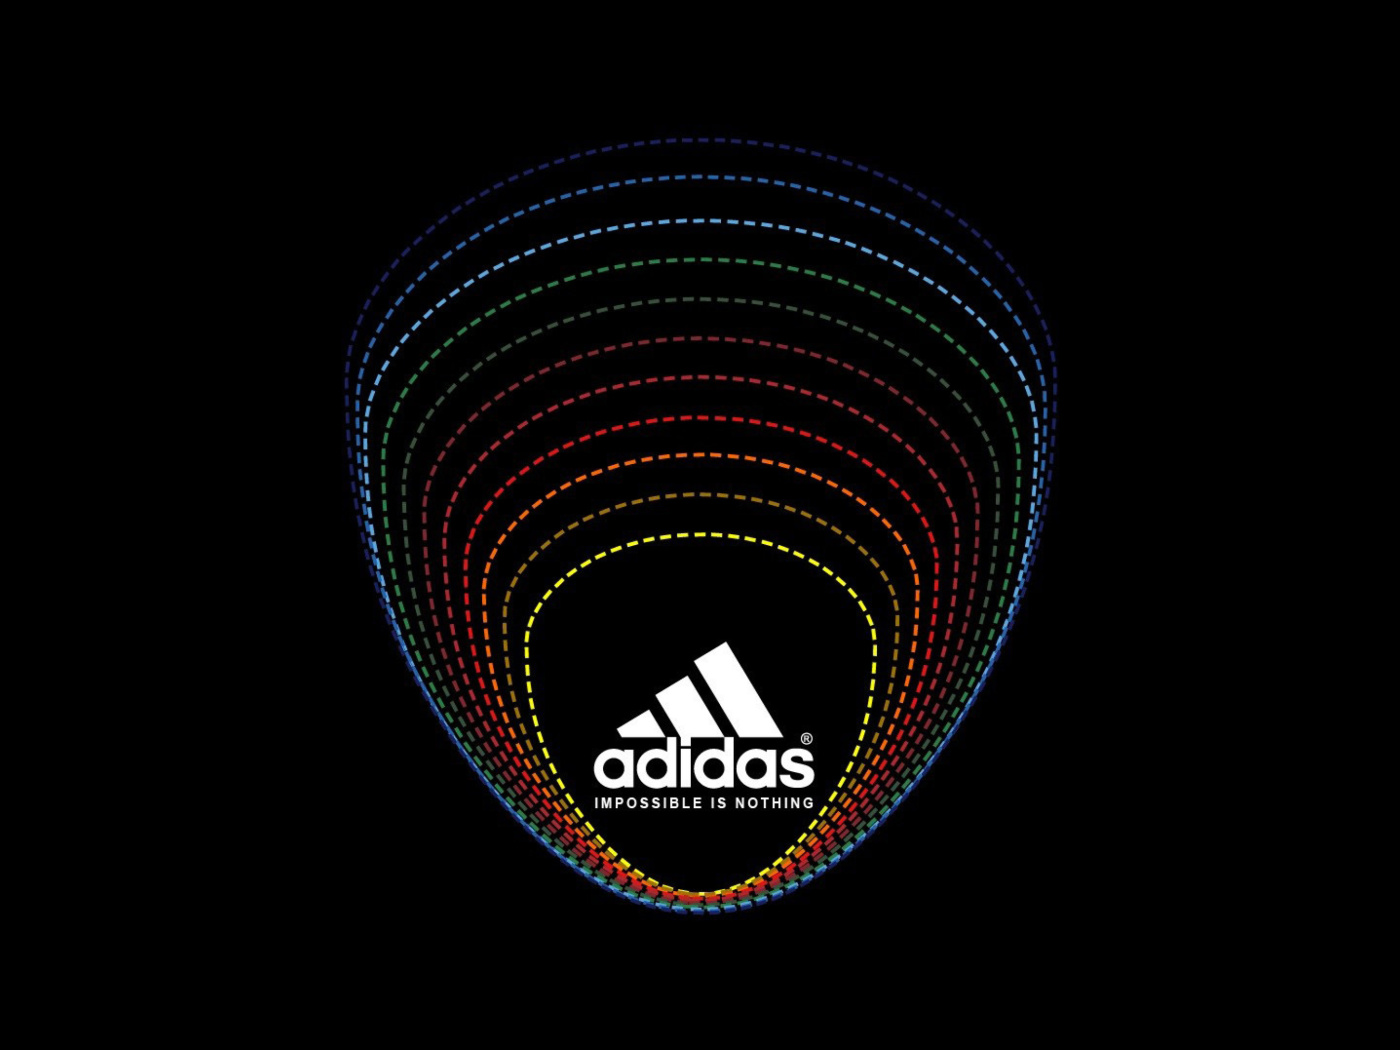 Das Adidas Tagline, Impossible is Nothing Wallpaper 1400x1050